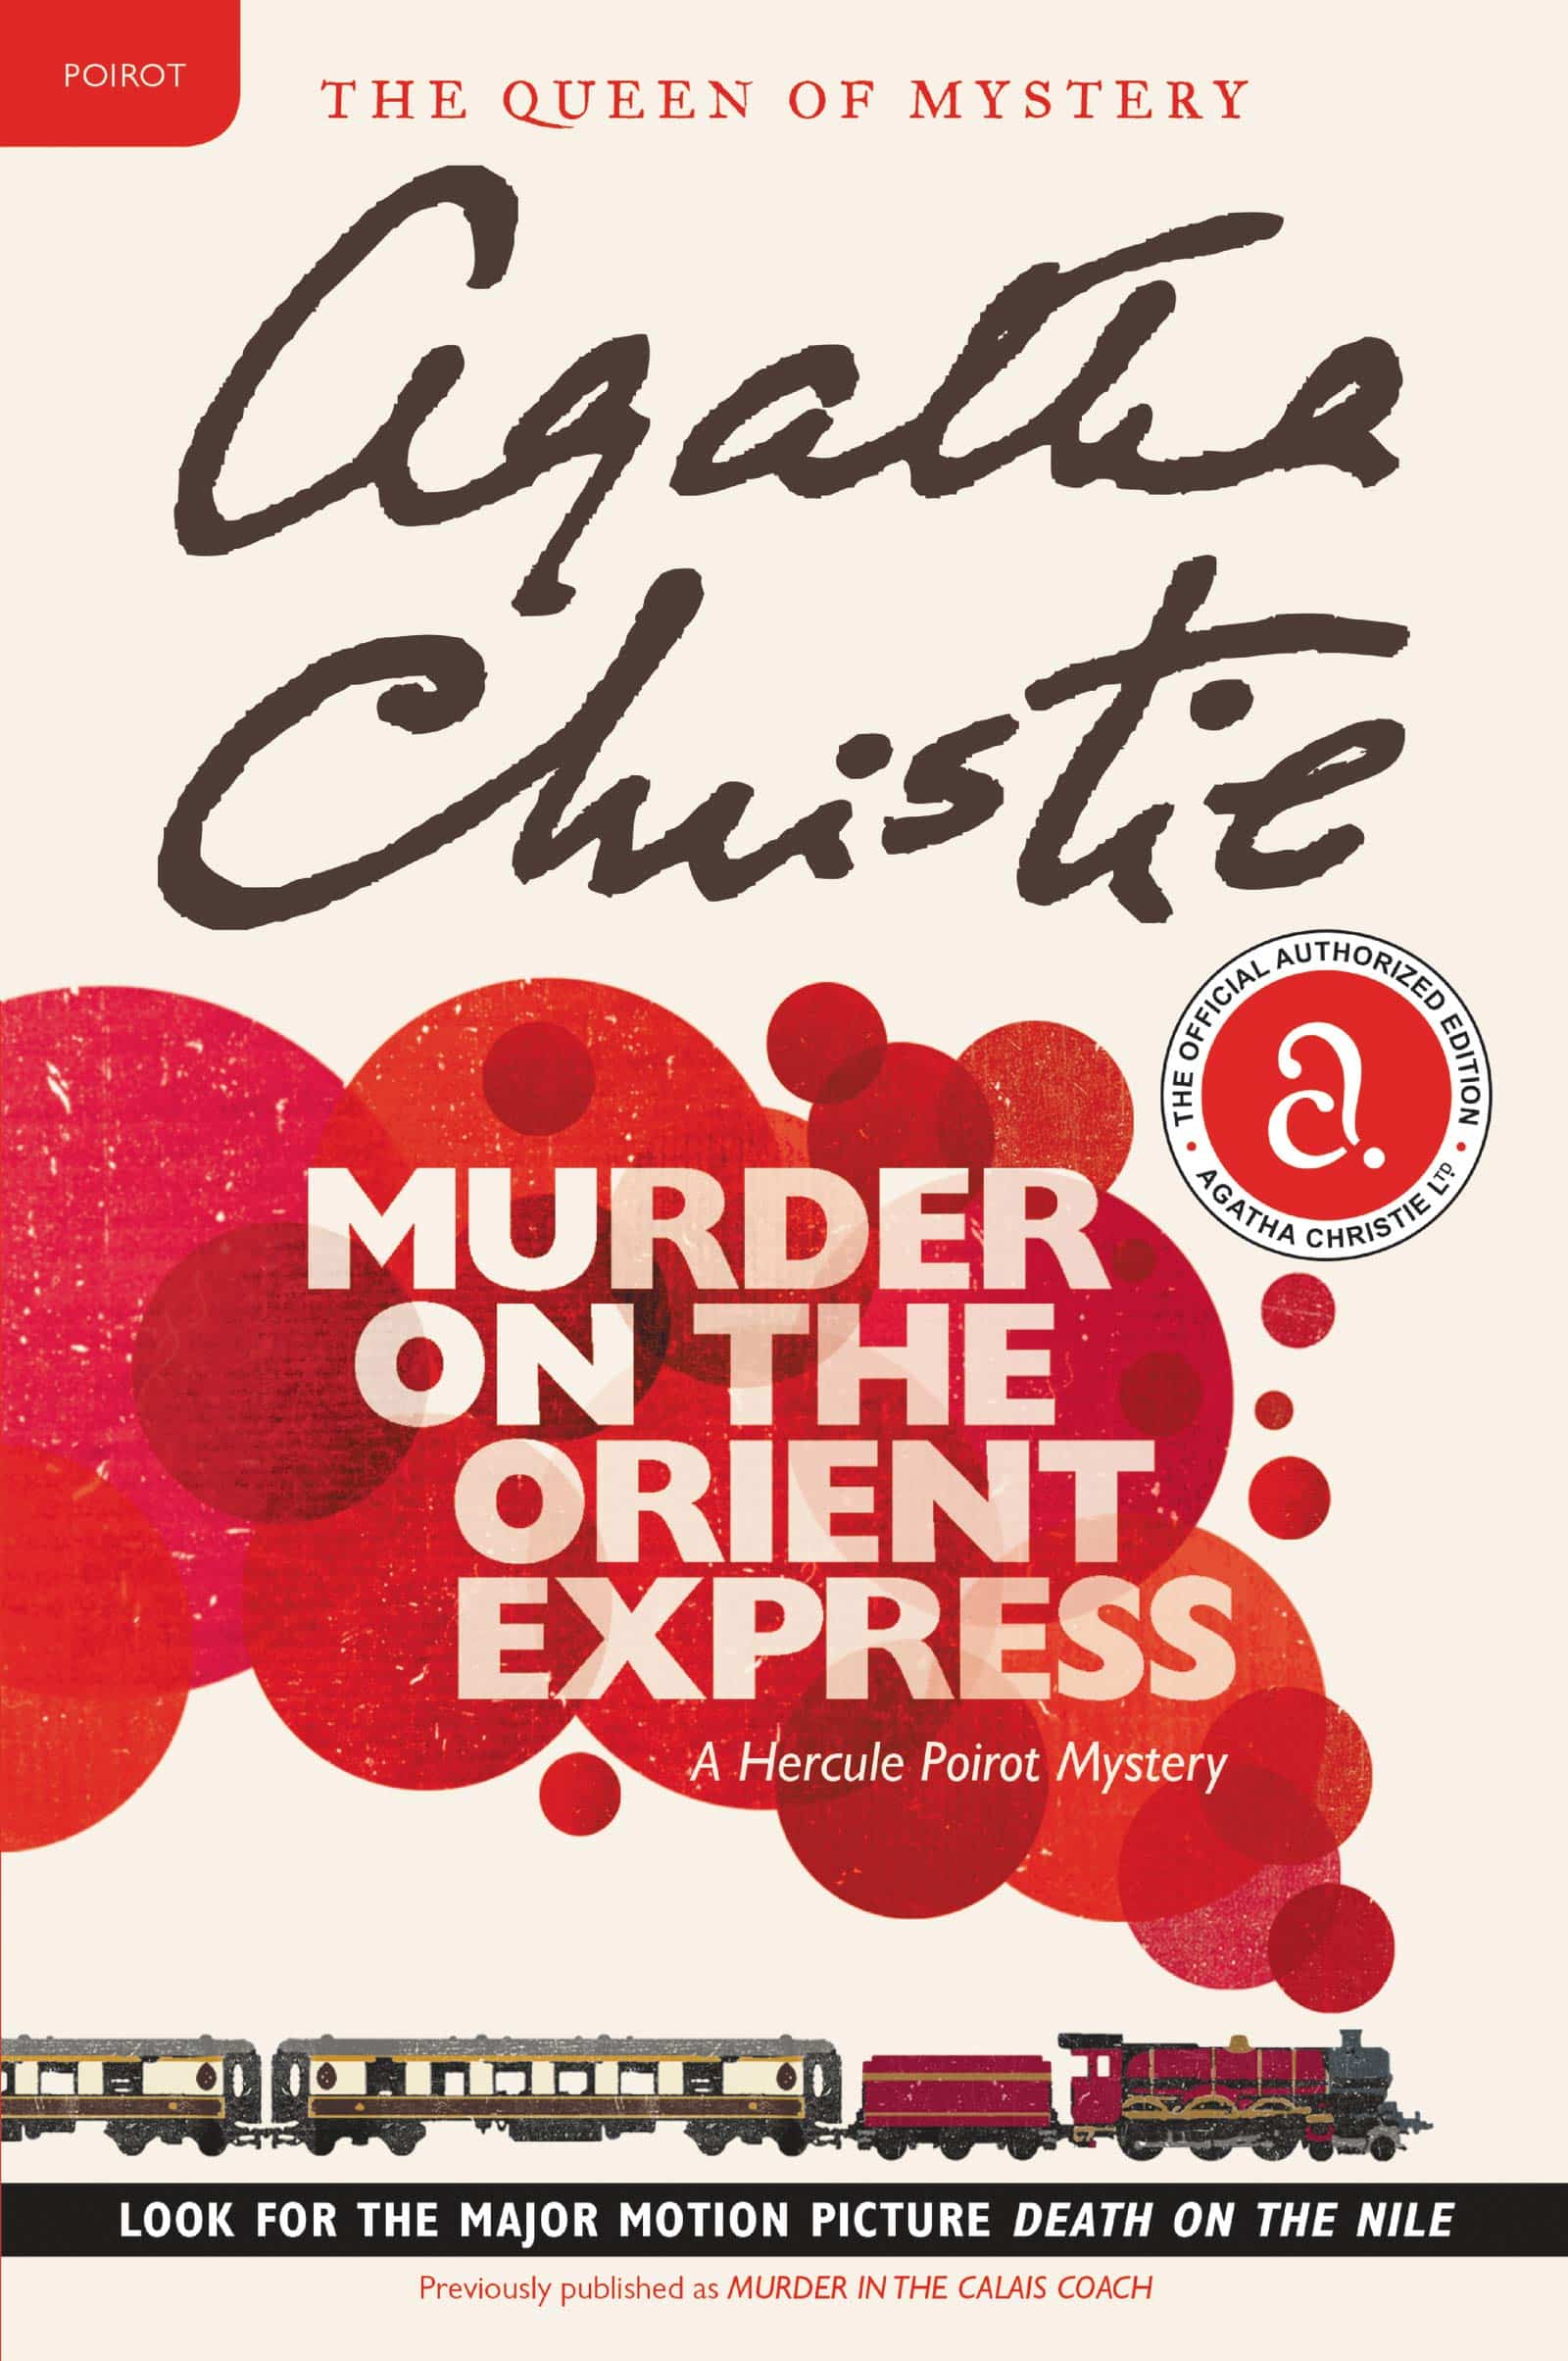 The cover of Murder on the Orient Express